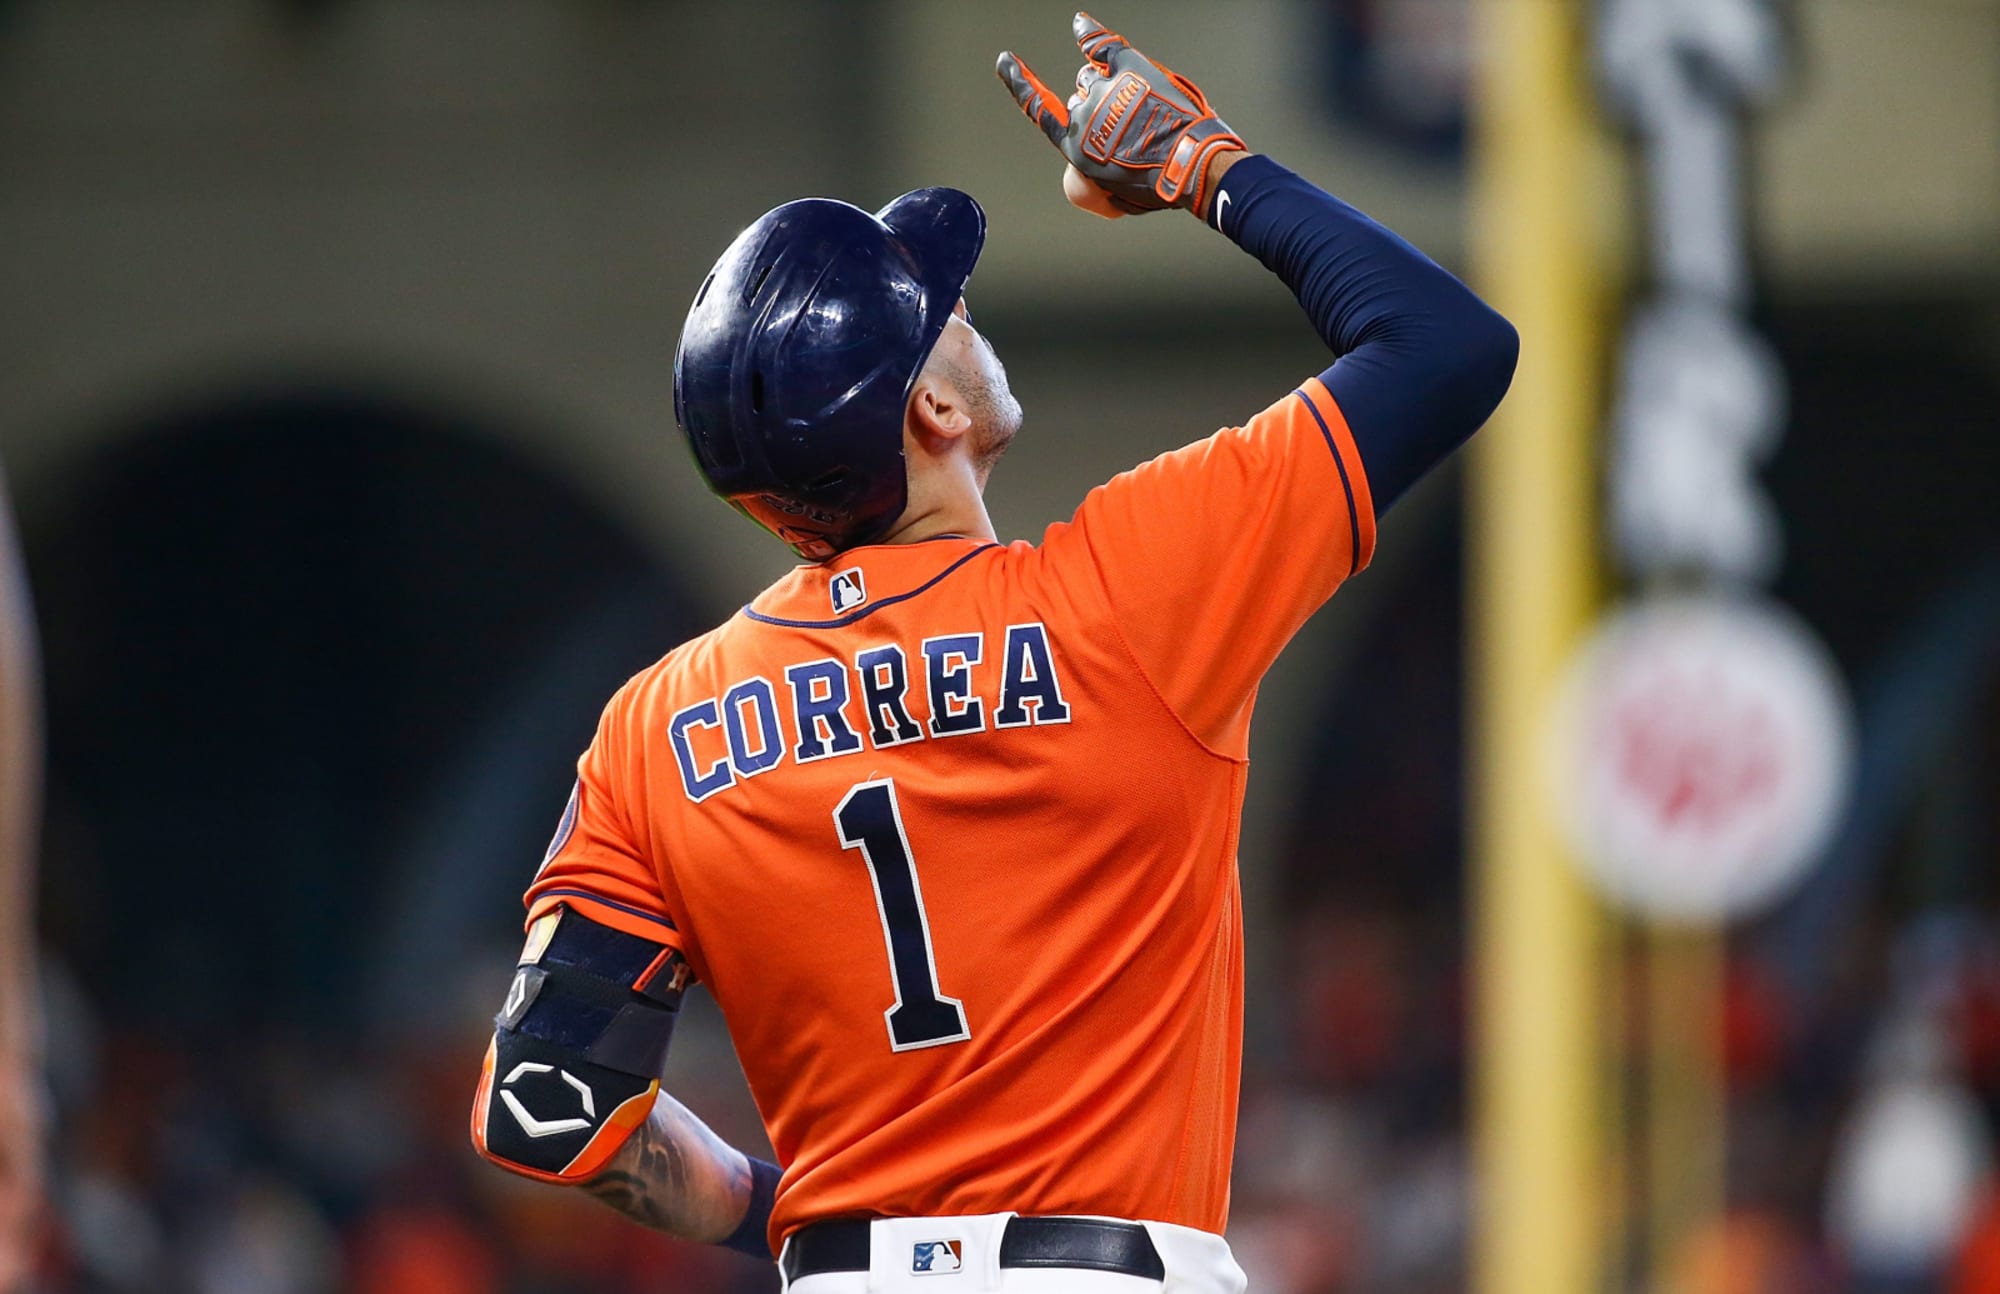 Yankees news: An argument against signing Carlos Correa - Pinstripe Alley